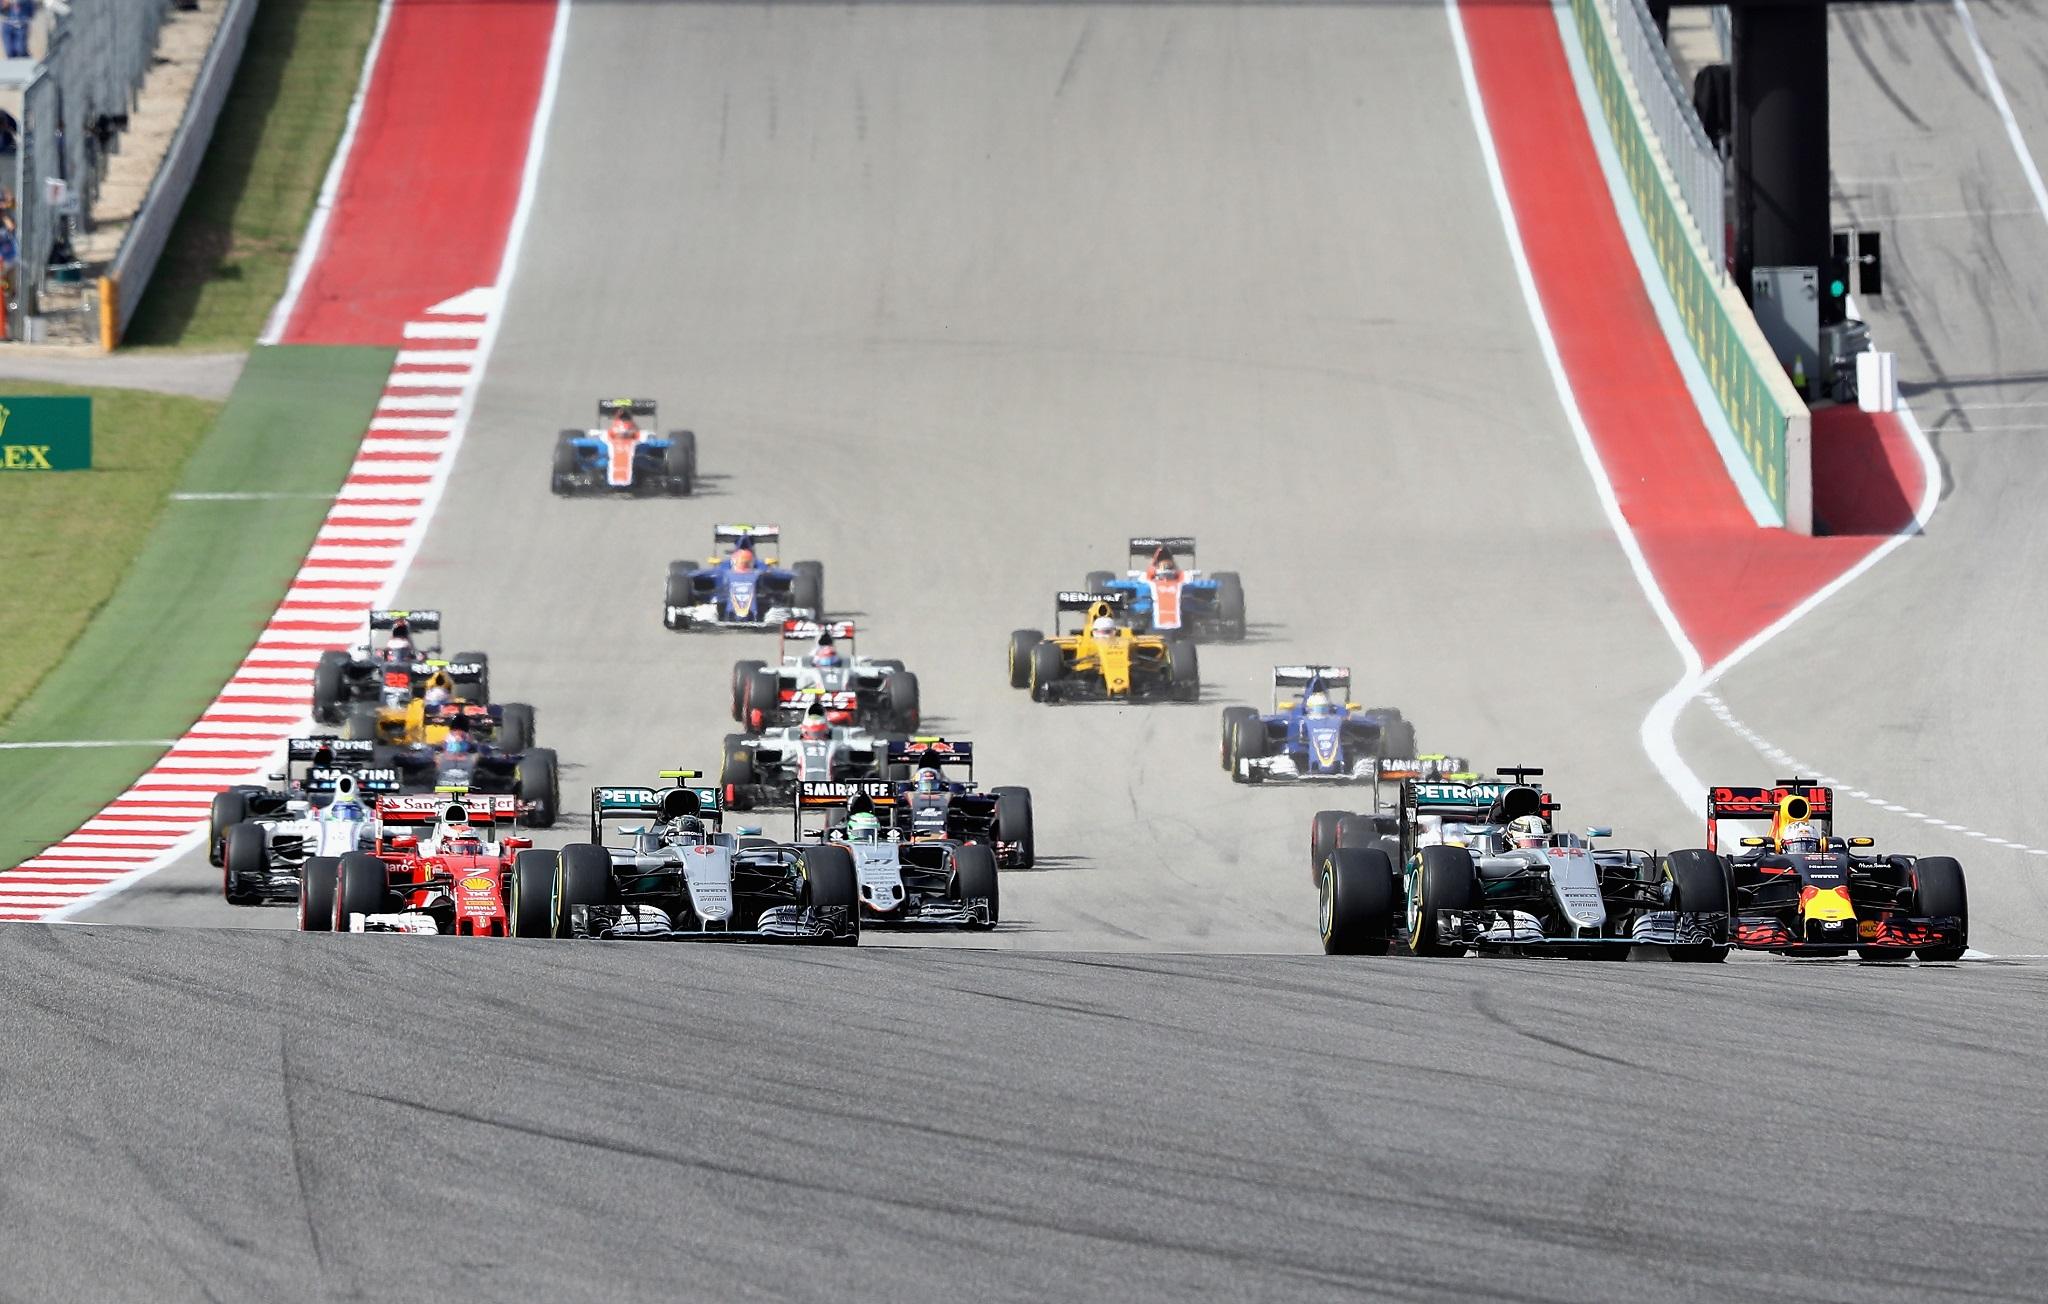 Lewis Hamilton leads the field into turn one of the US Grand Prix